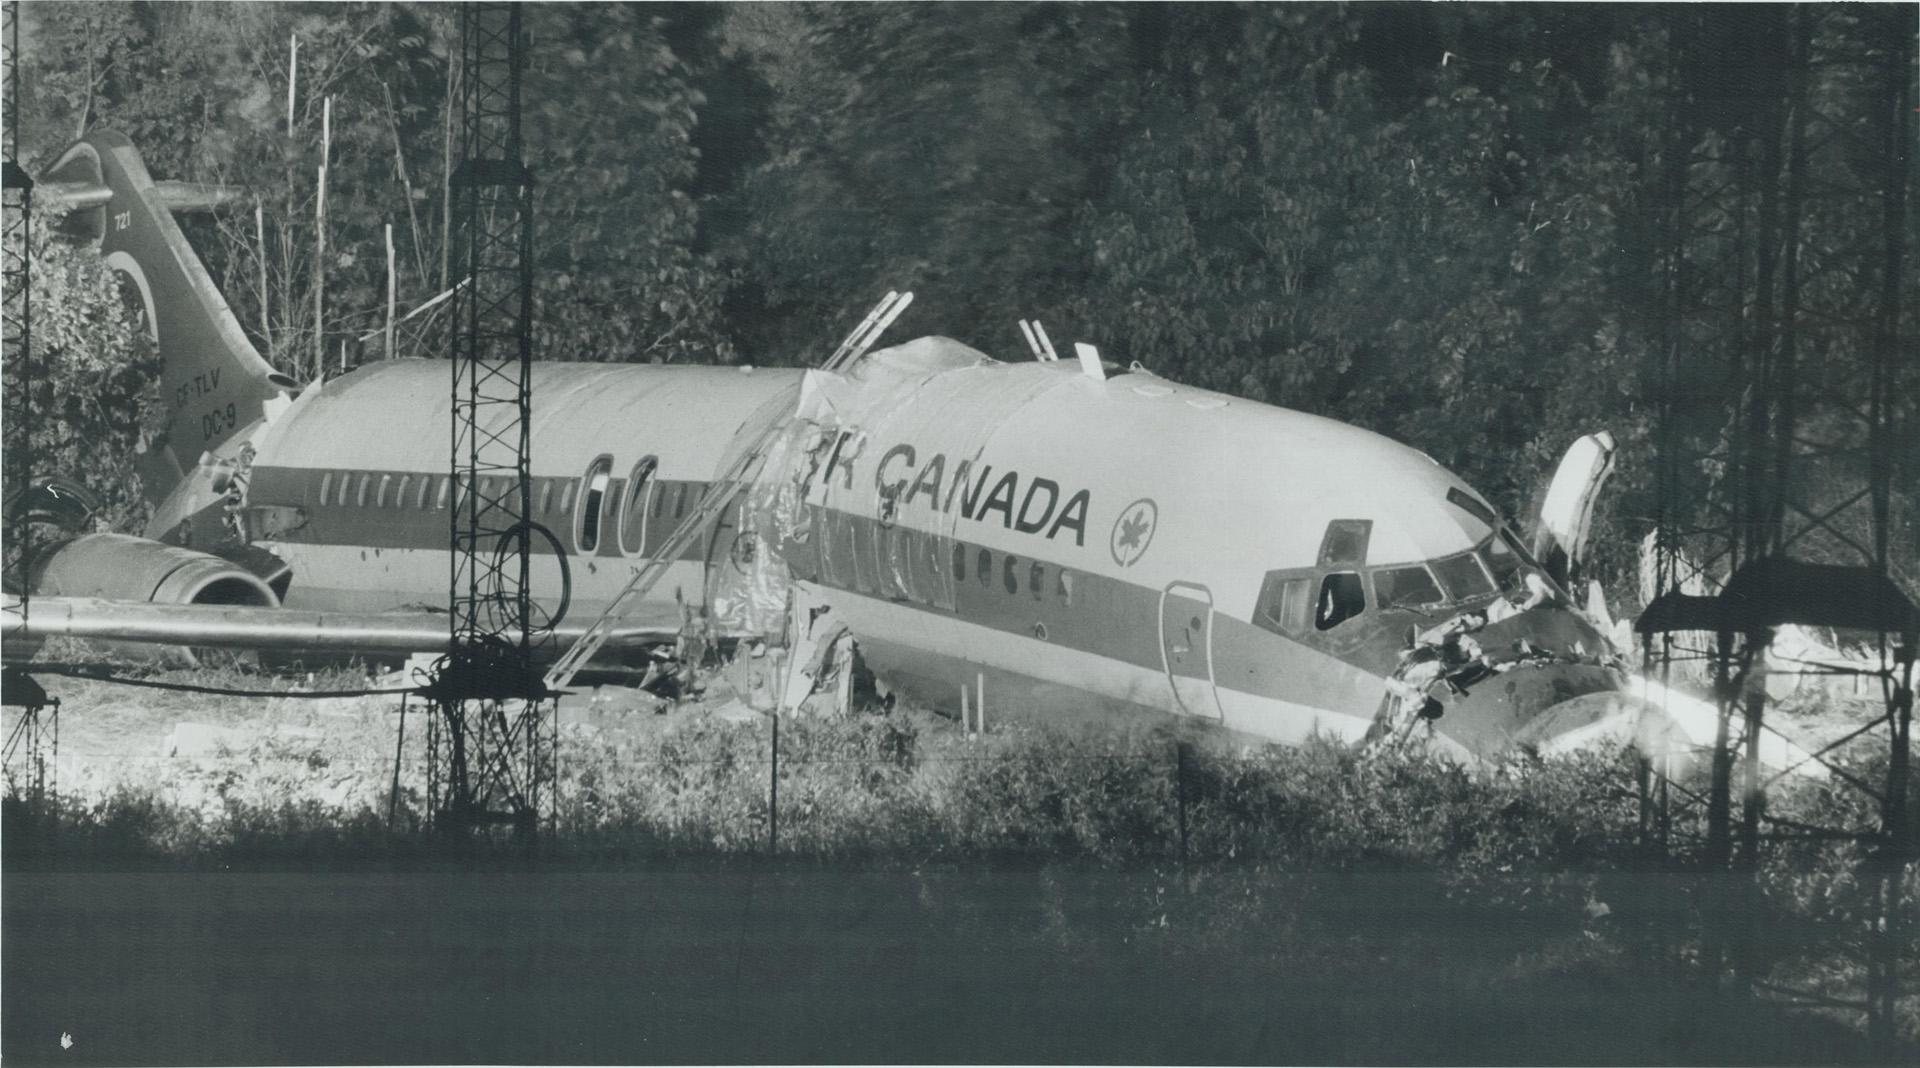 Two people died and 105 were injured when Air Canada DC-9 skidded into ravine and broke up at Toronto International Airport